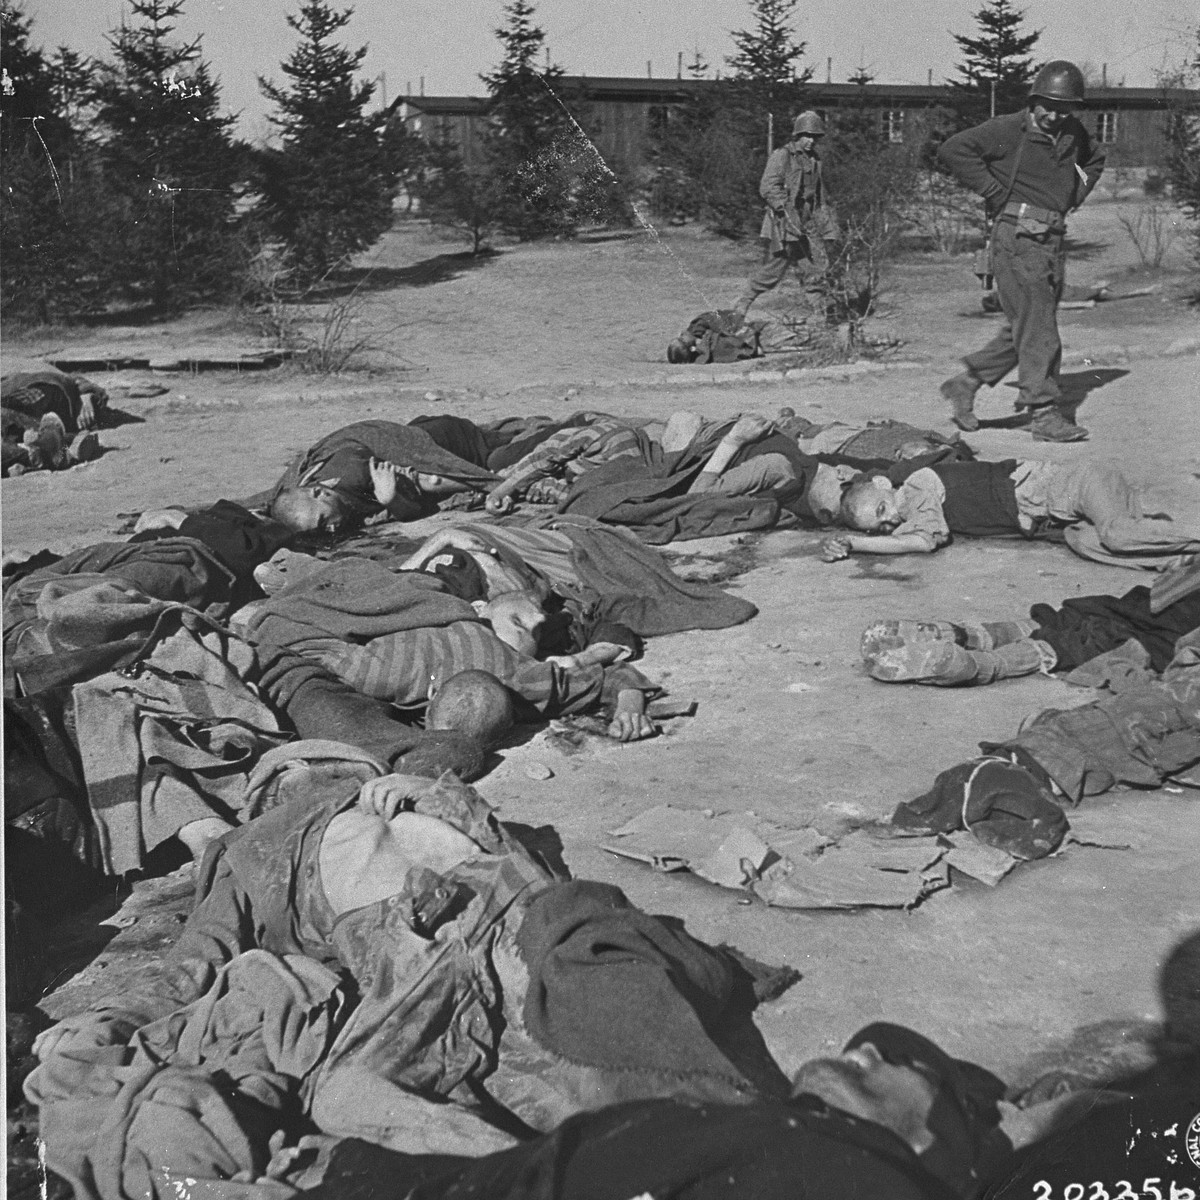 American soldiers walk past the bodies of Ohrdruf prisoners who were killed during the evacuation of the concentration camp.